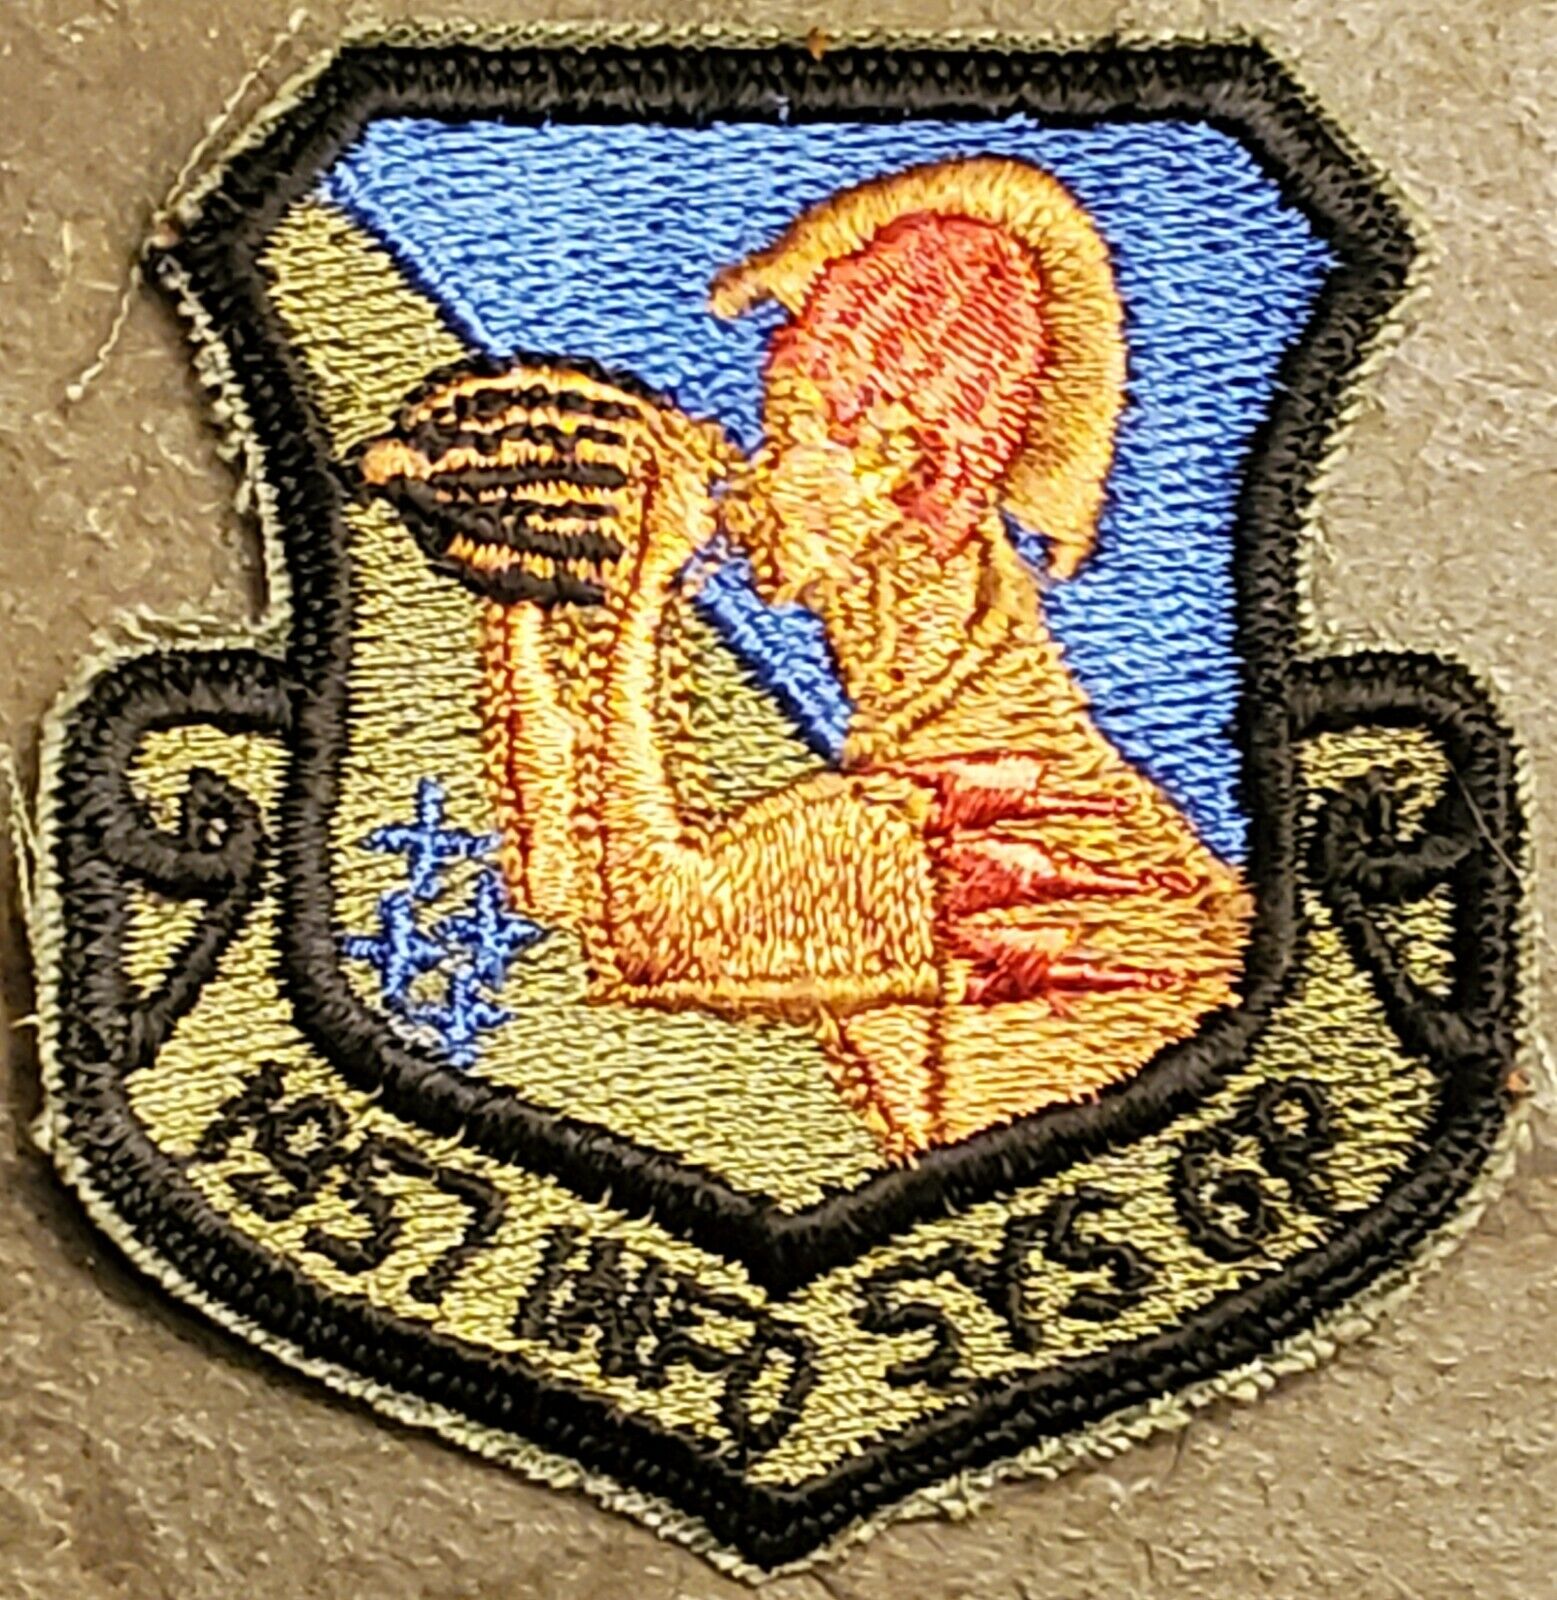 USAF 1957th INFORMATION SYSTEMS GROUP subdued Patch VINTAGE ORIGINAL MILITARY